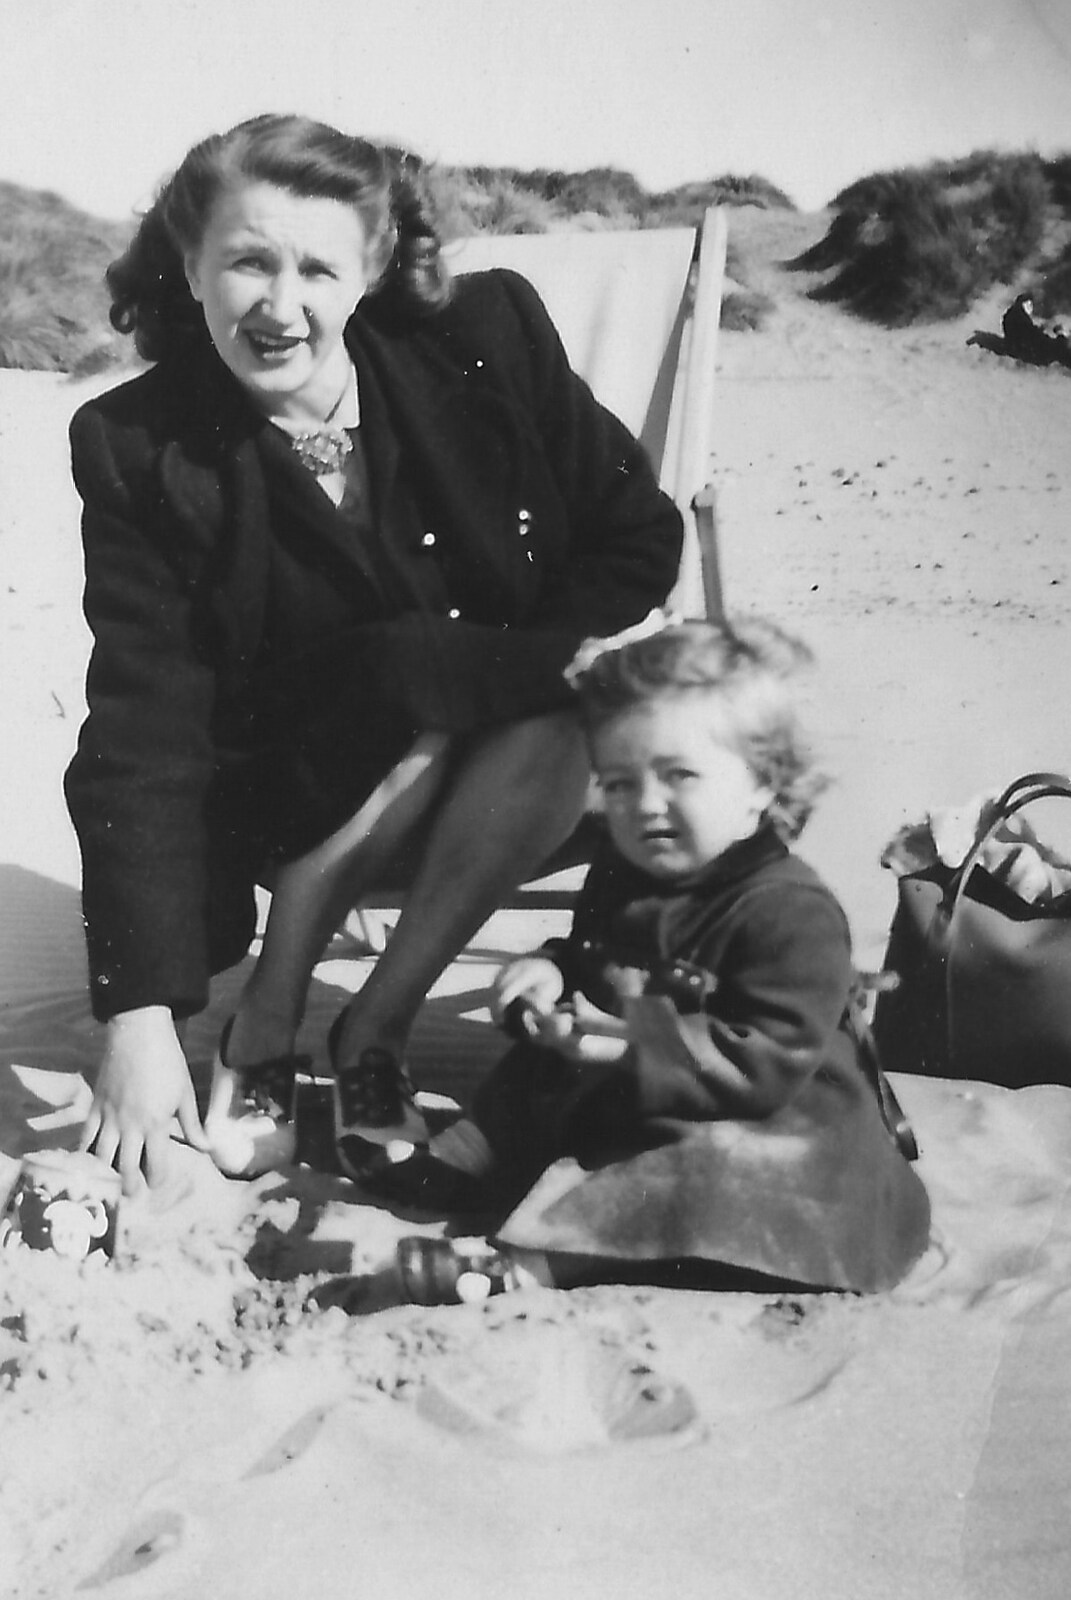 Family History: The 1940s and 1950s - 24th January 2020: Margaret and Judith